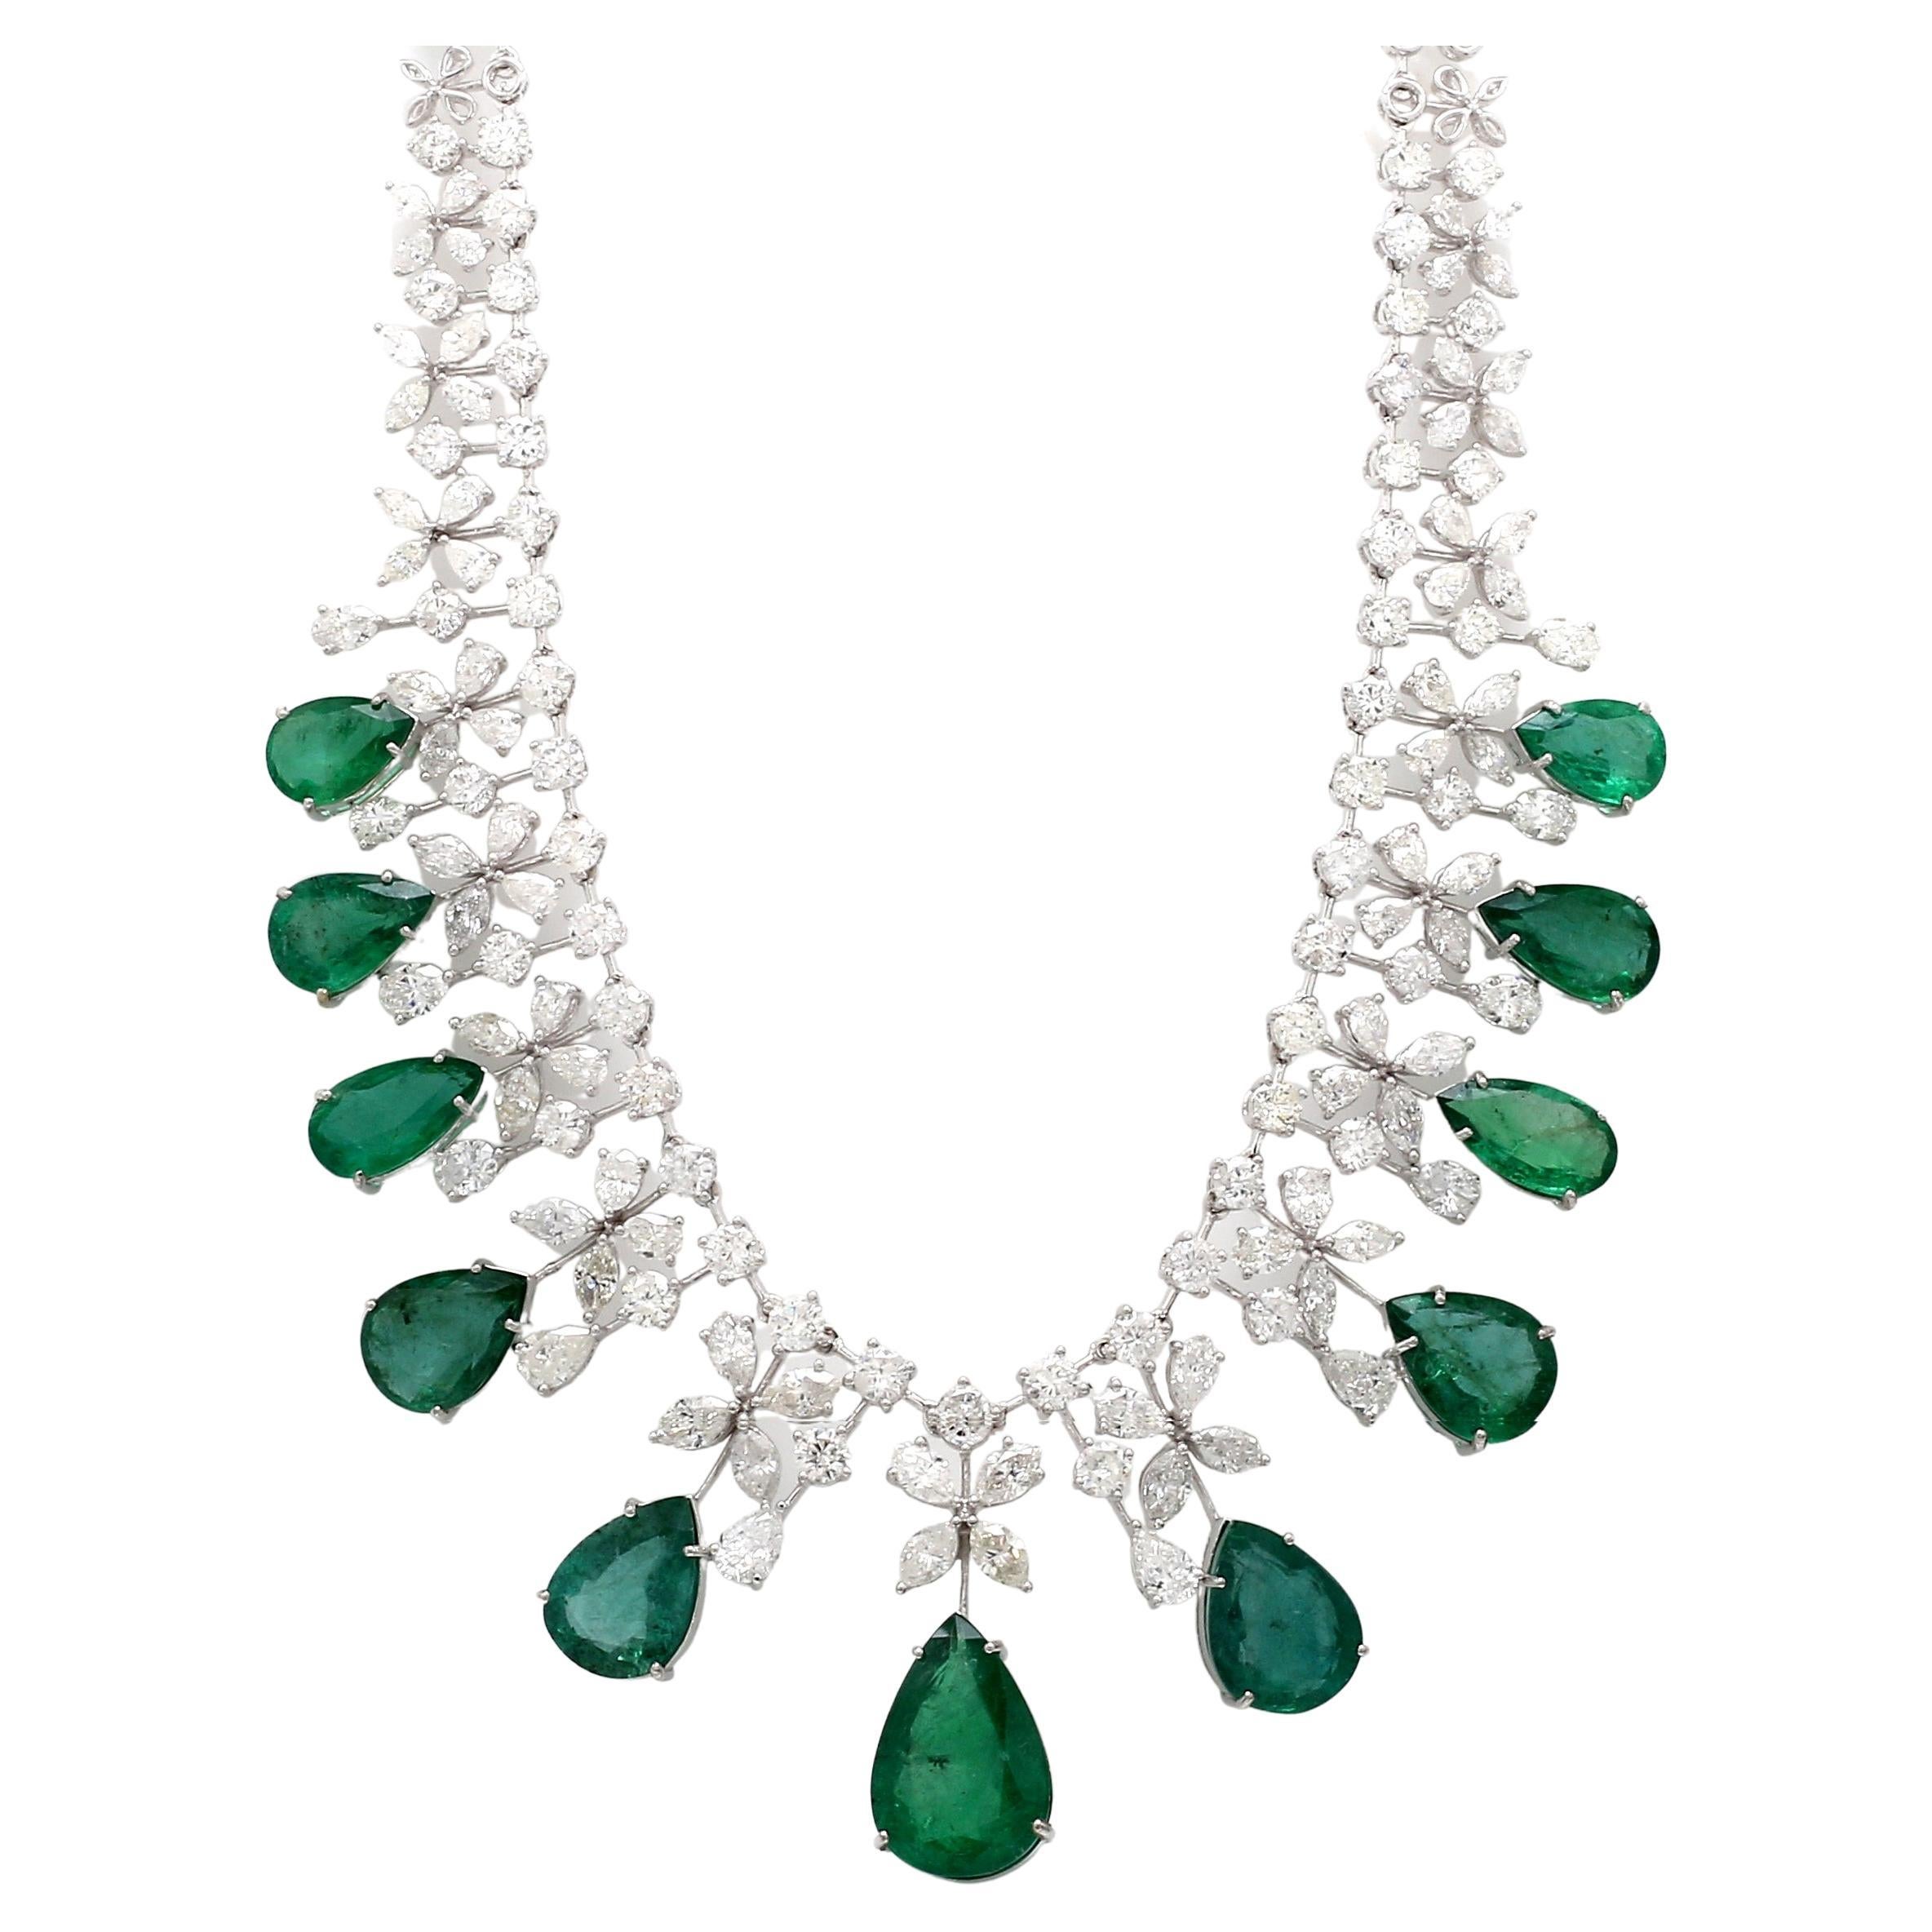 The necklace is meticulously crafted from 18 karat white gold, chosen for its luxurious appearance and durability. The white gold setting perfectly complements the emerald and diamonds, creating a harmonious fusion of elegance and strength. The